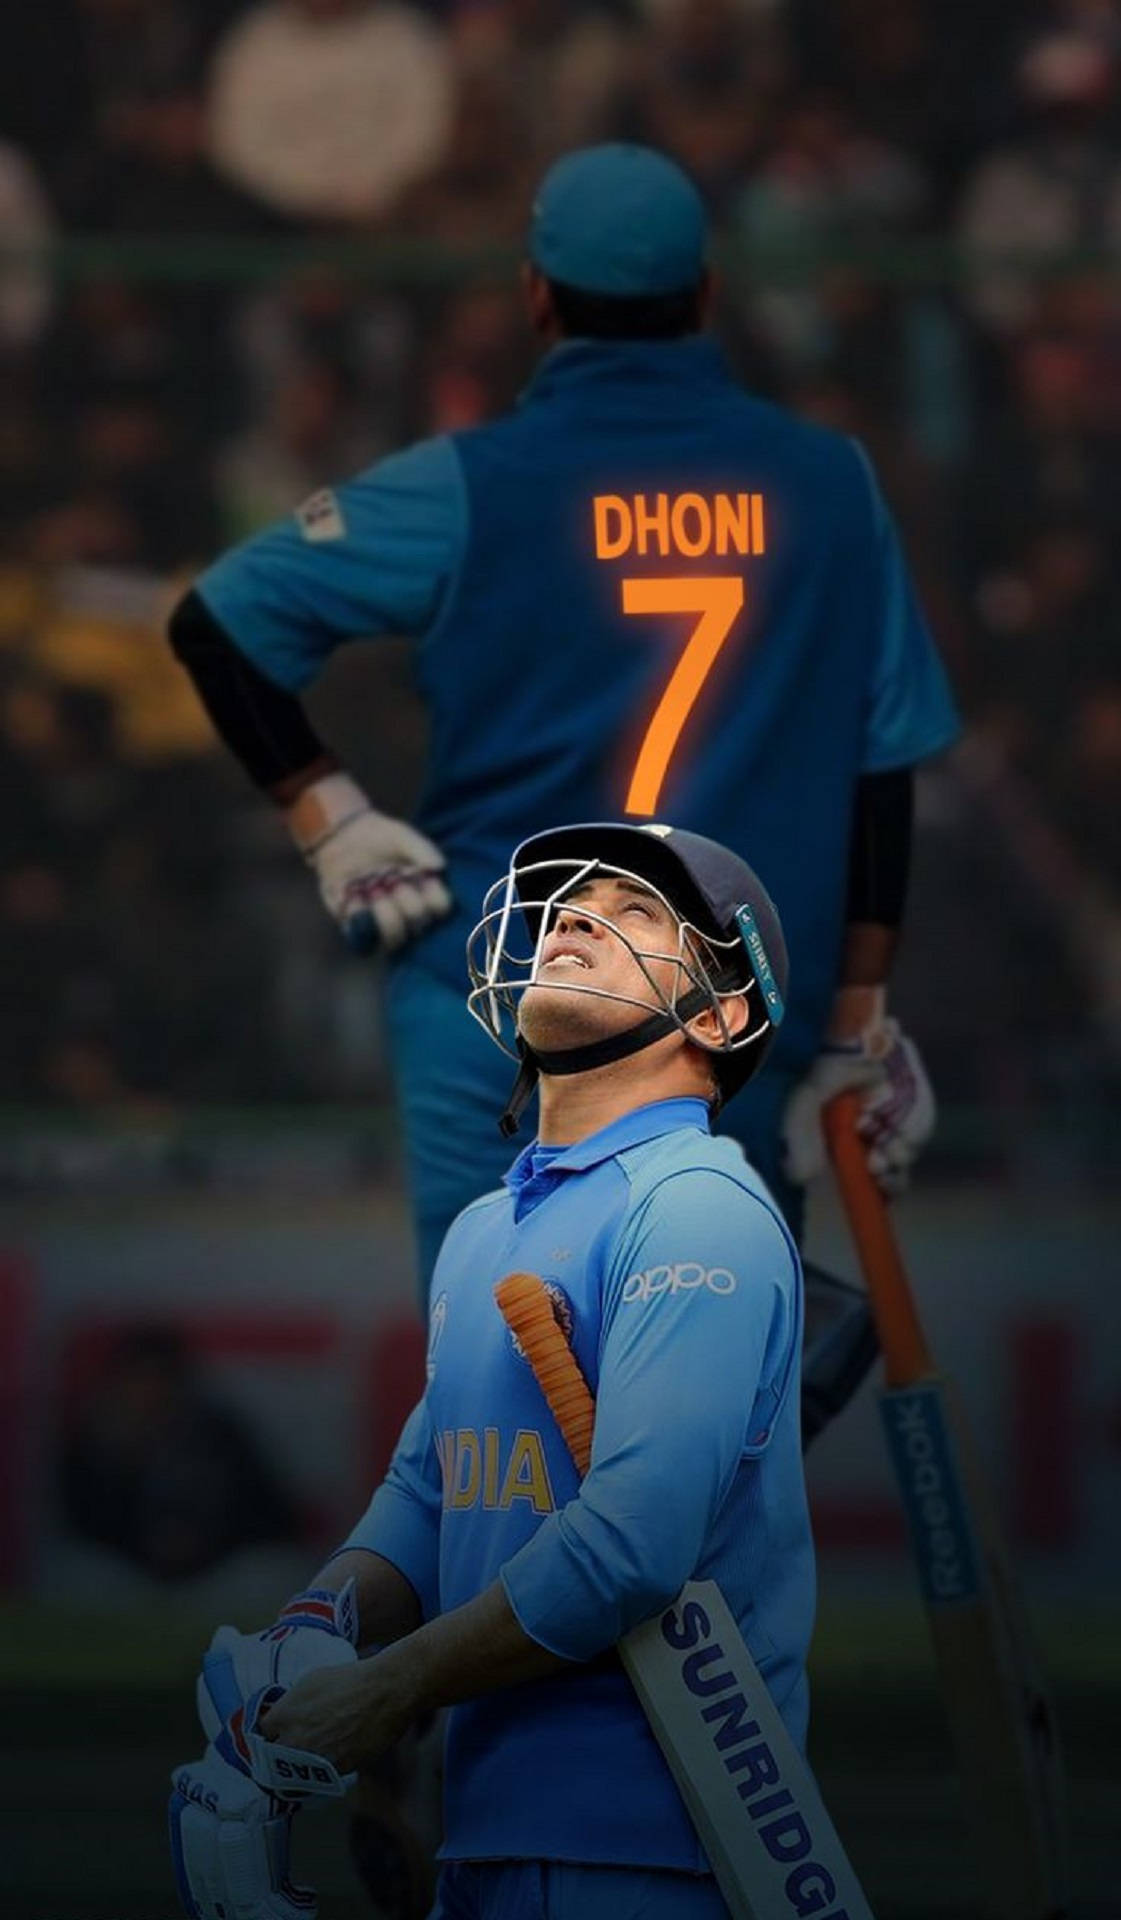 Ms Dhoni Indian Cricket Poster Background